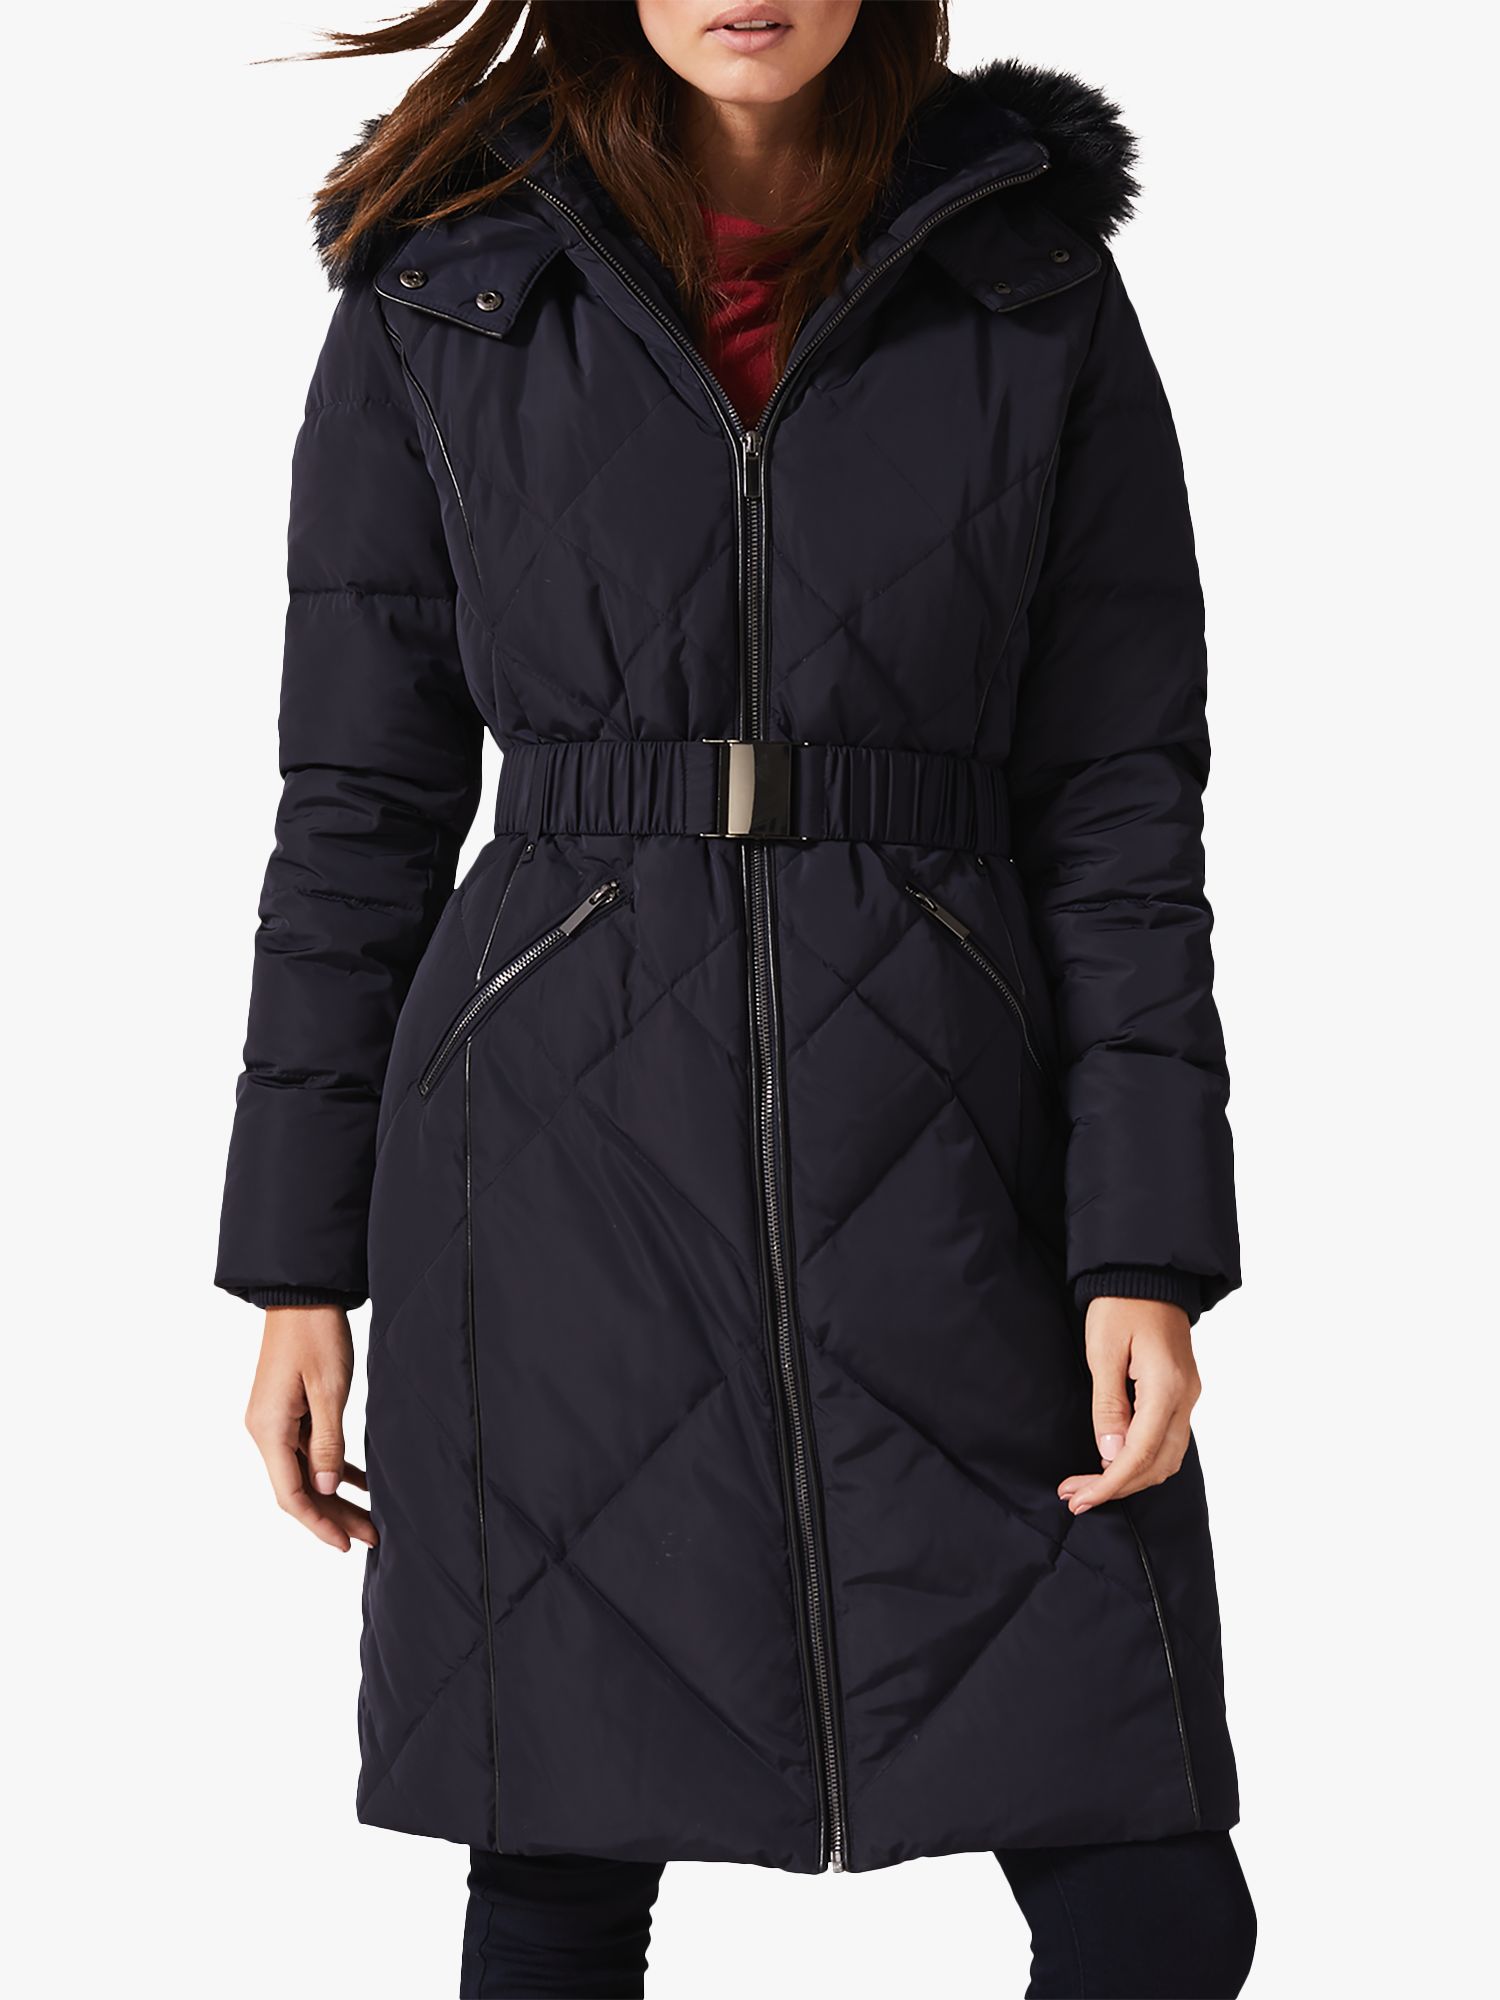 Phase Eight Lacey Faux Fur Trim Puffer Coat, Navy at John Lewis & Partners